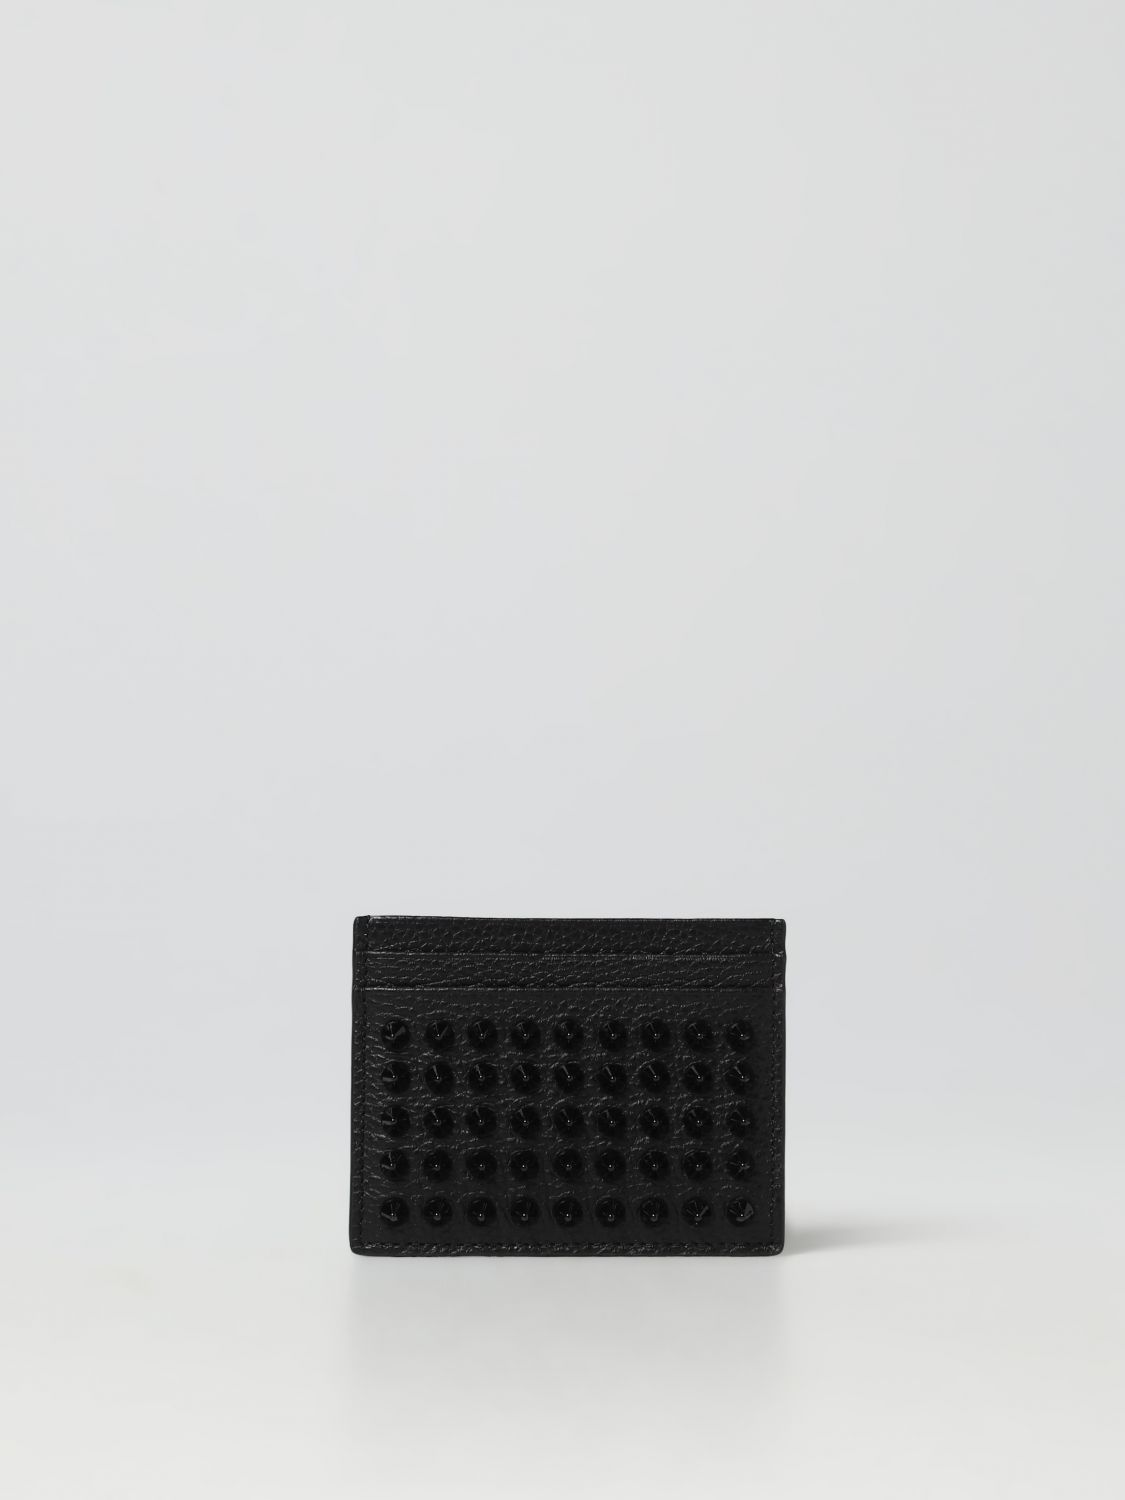 Christian Louboutin Kios Spike Credit Card Holder In Grained Leather In Black